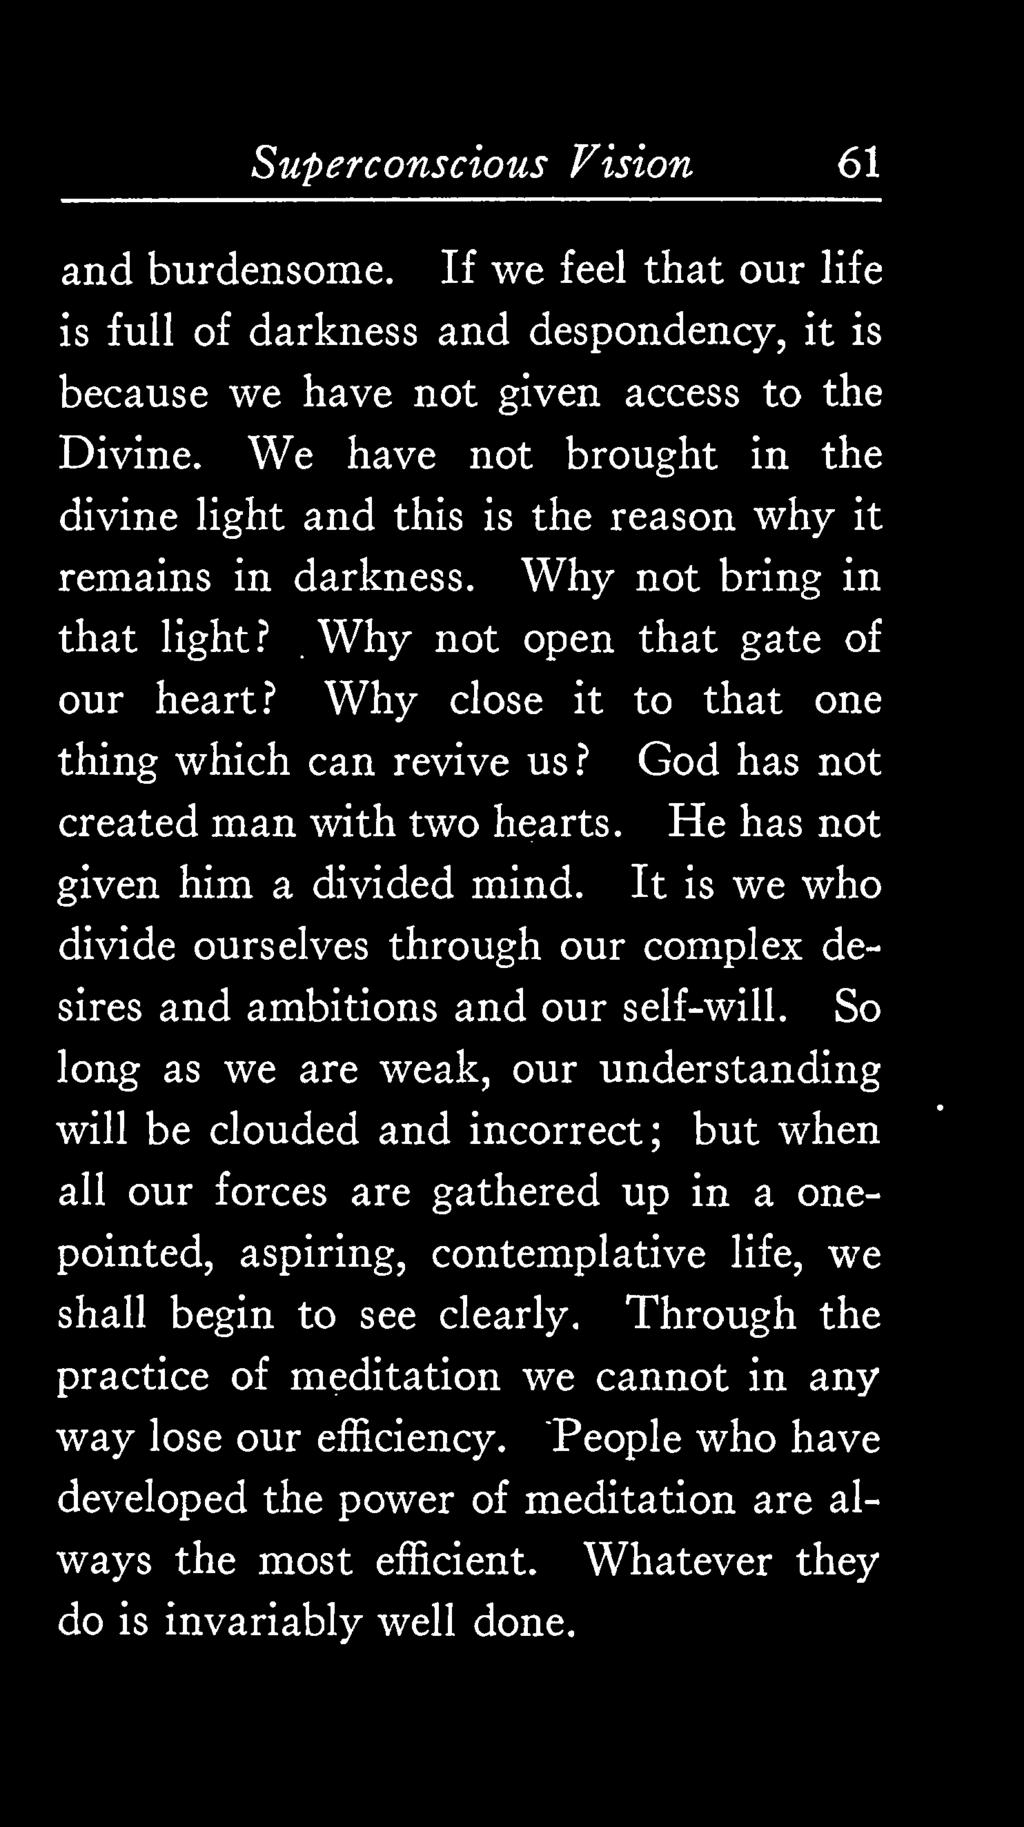 Why close it to that one thing which can revive us? God has not created man with two hearts. He has not given him a divided mind.